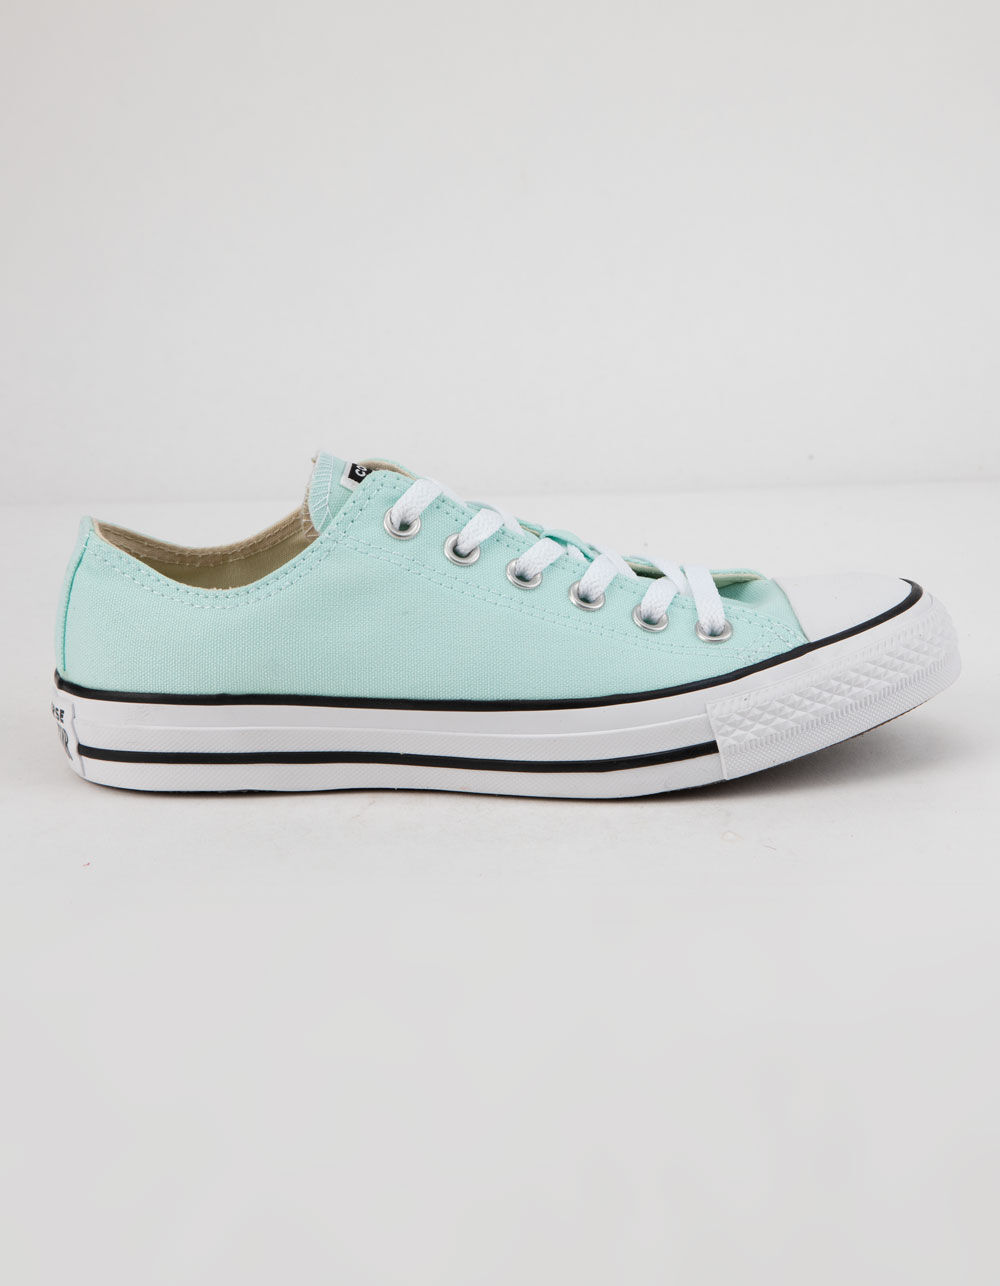 UPC 888756444213 product image for CONVERSE Chuck Taylor All Star Seasonal Color Teal Tint Low Top Shoes | upcitemdb.com